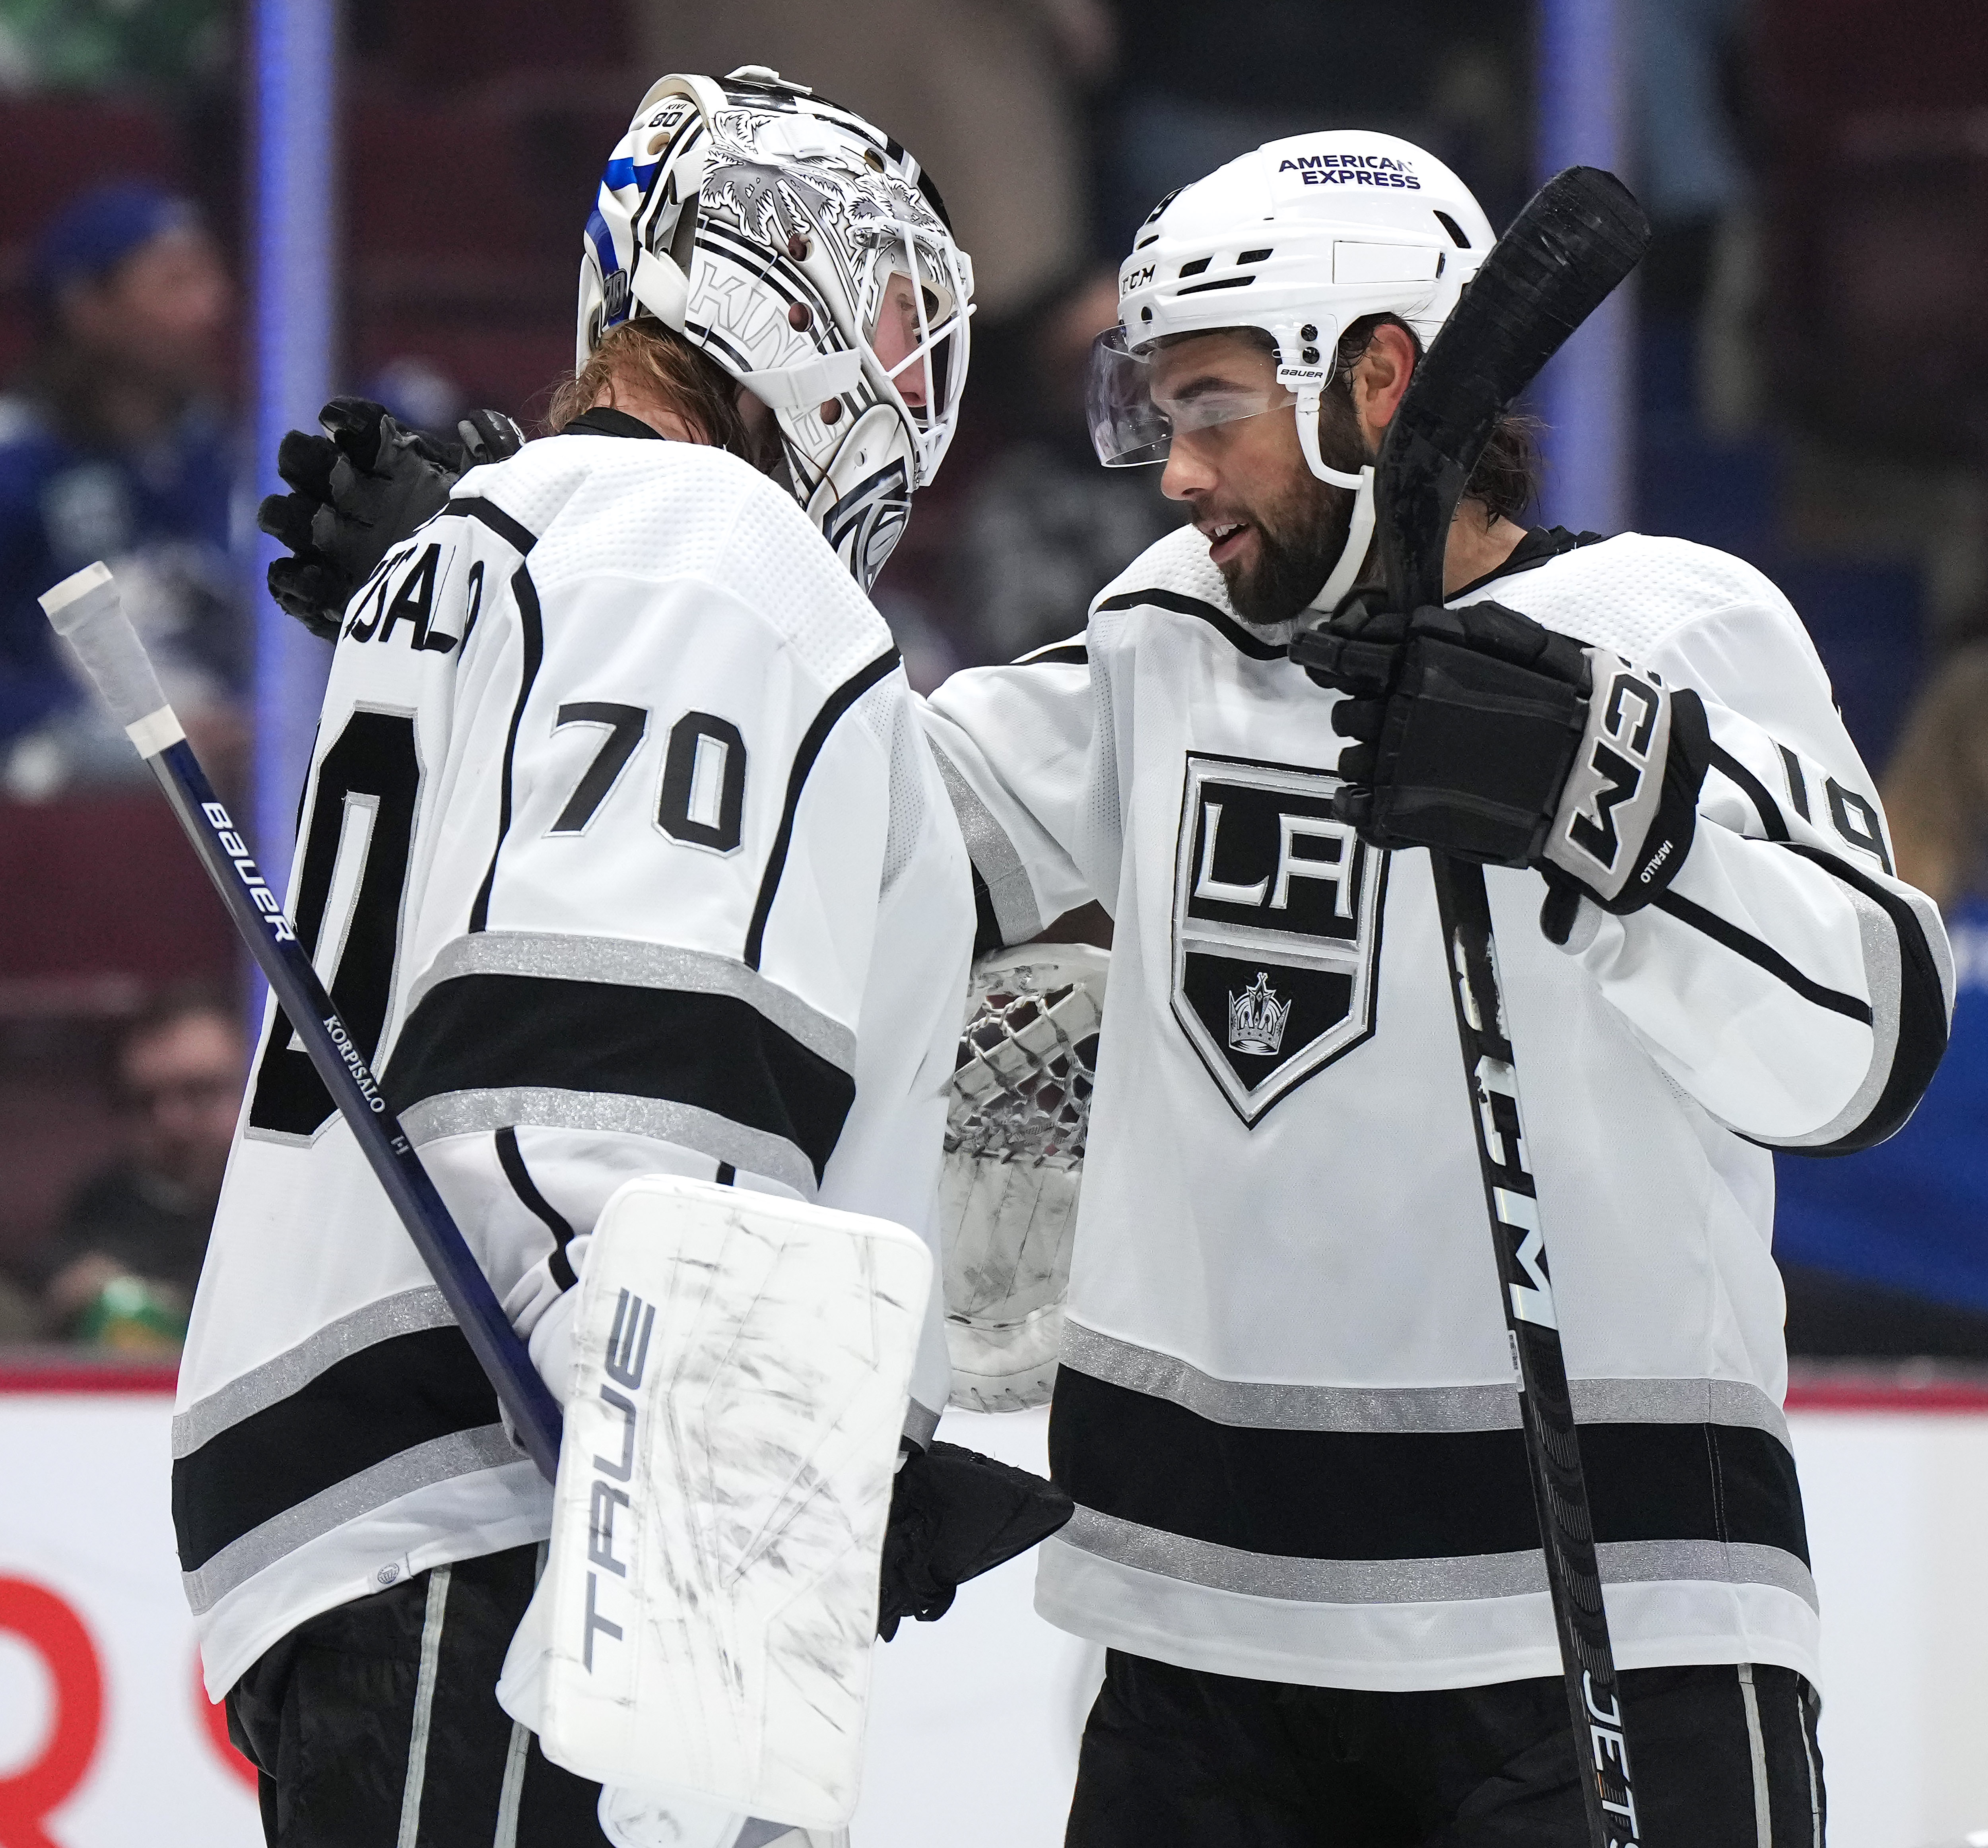 Kings clinch playoff berth with 4-1 win over Canucks